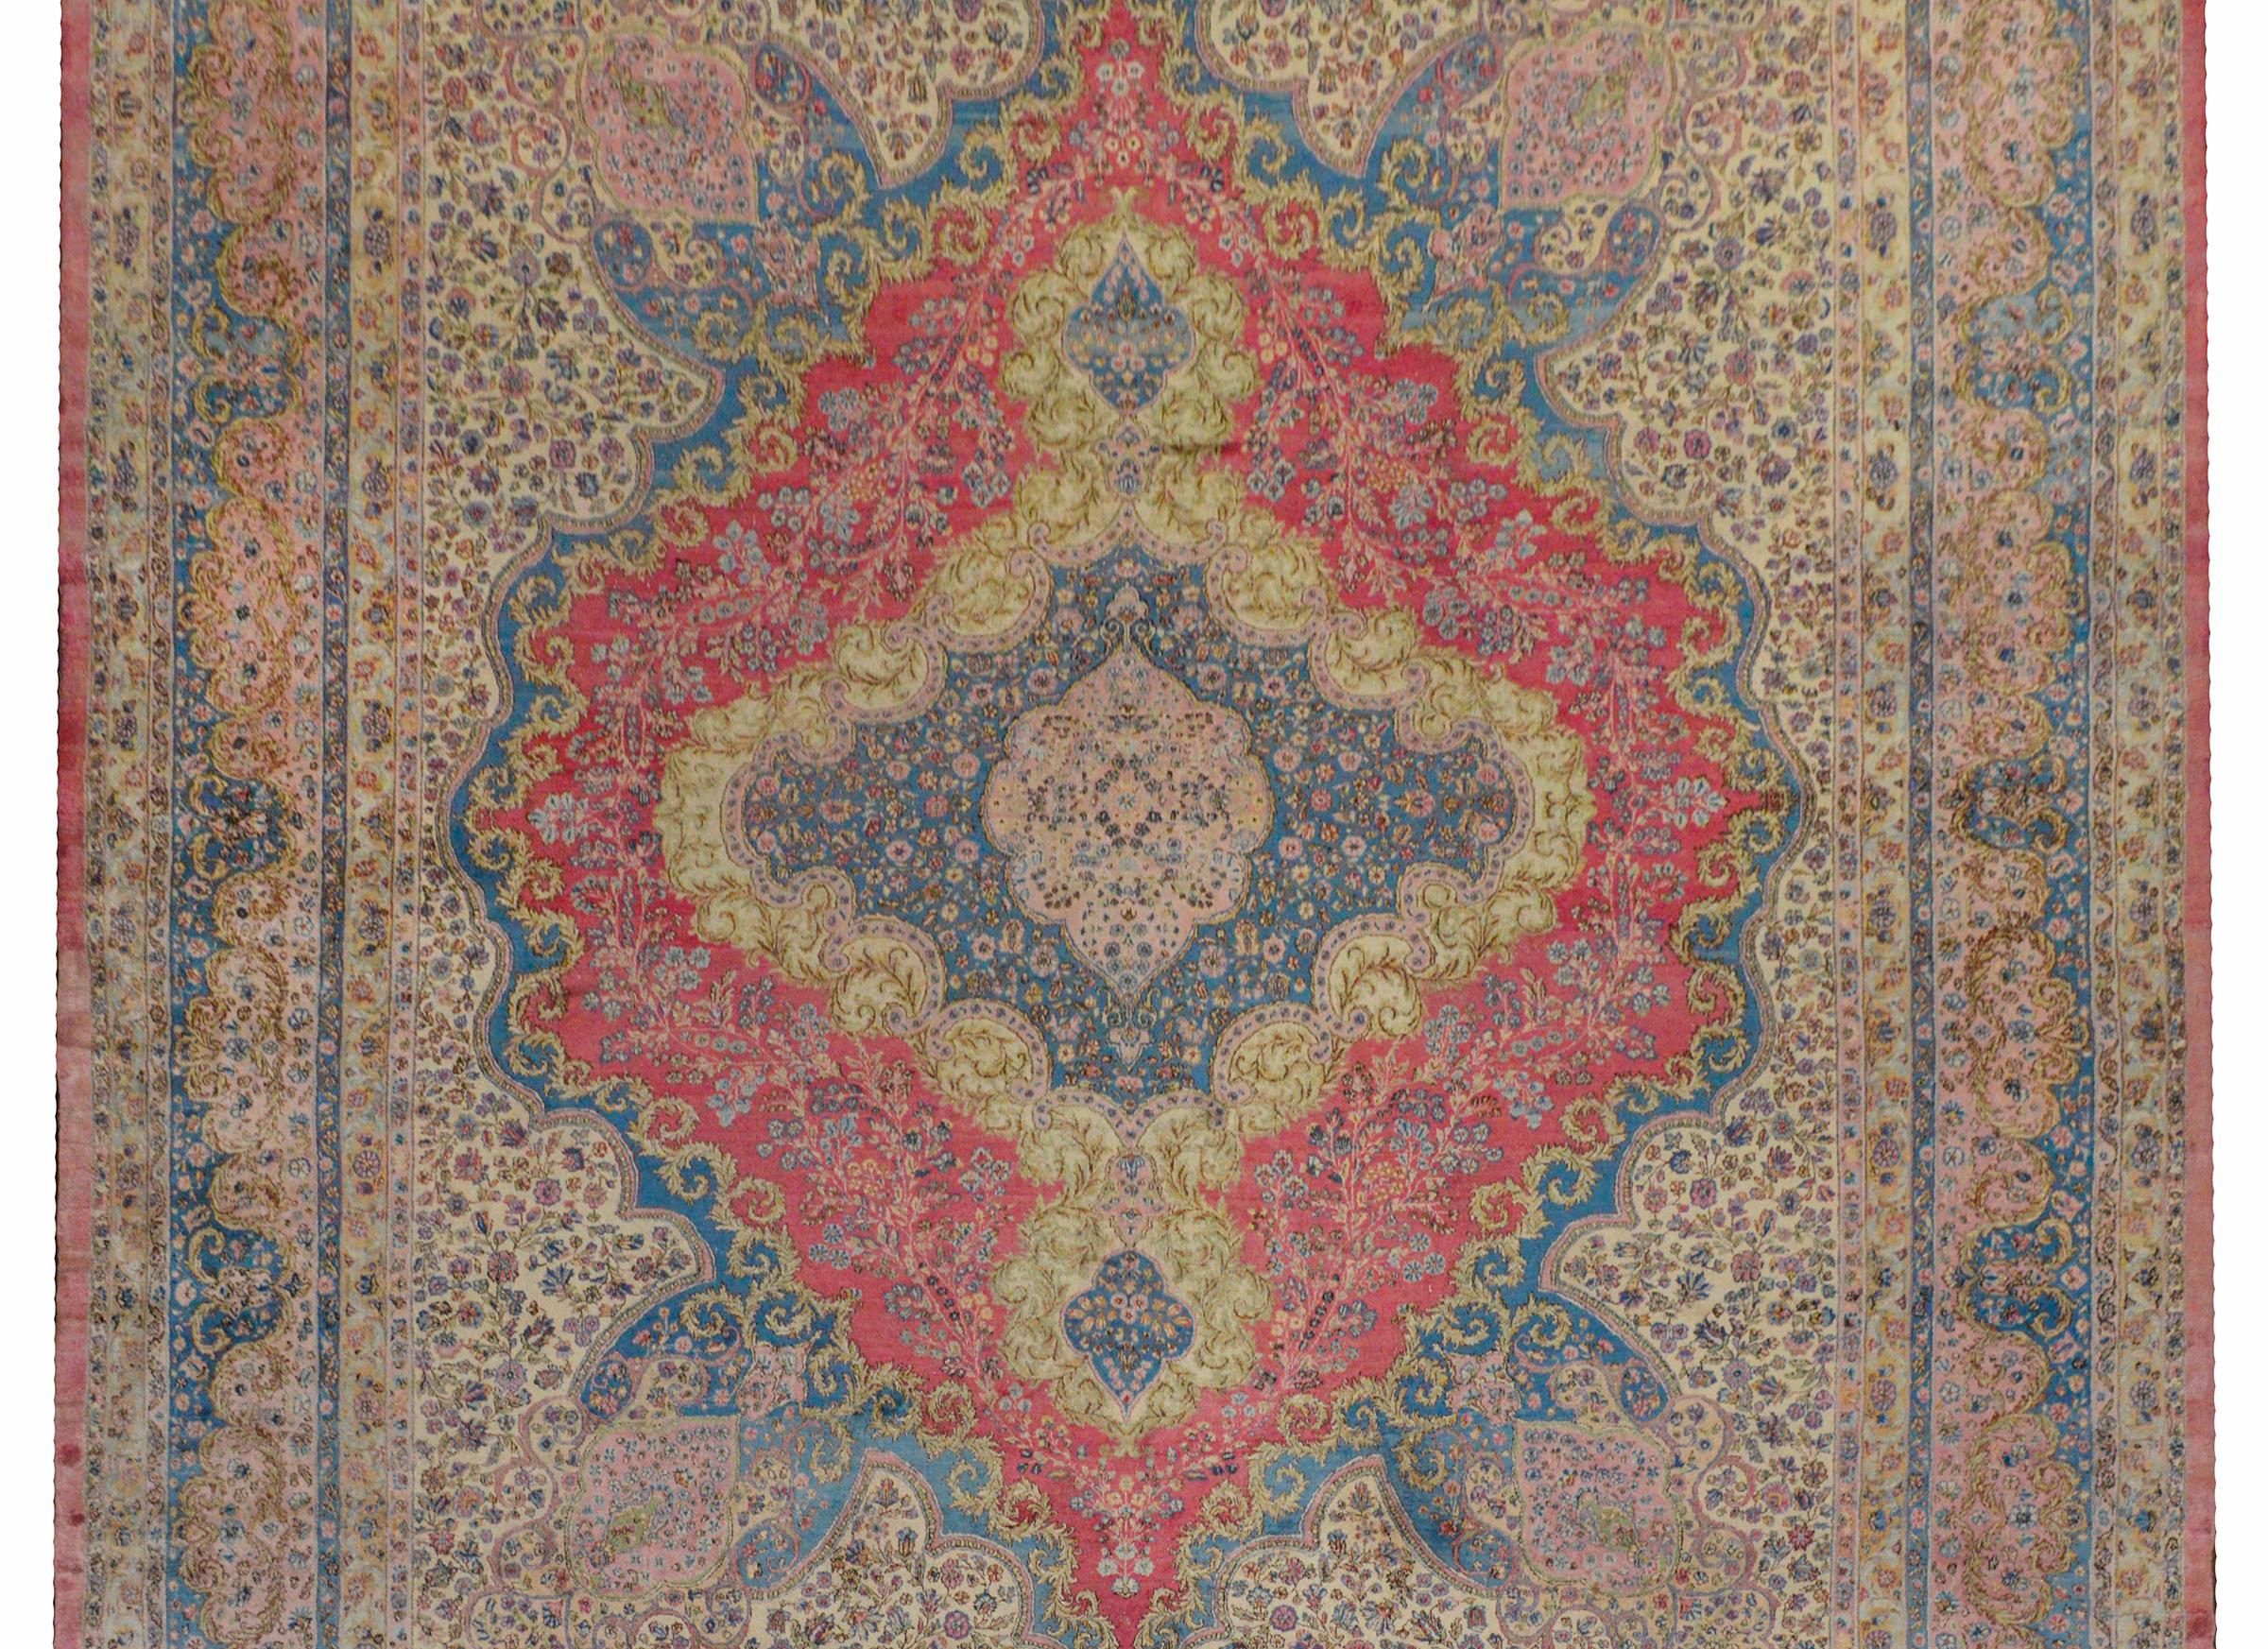 An outstanding early 20th century palatial Persian Kirman rug with an incredible large-scale floral diamond medallion woven in light indigo, gold, pale green, and pink amidst a field of flowers on a cream colored background. The border is Grande